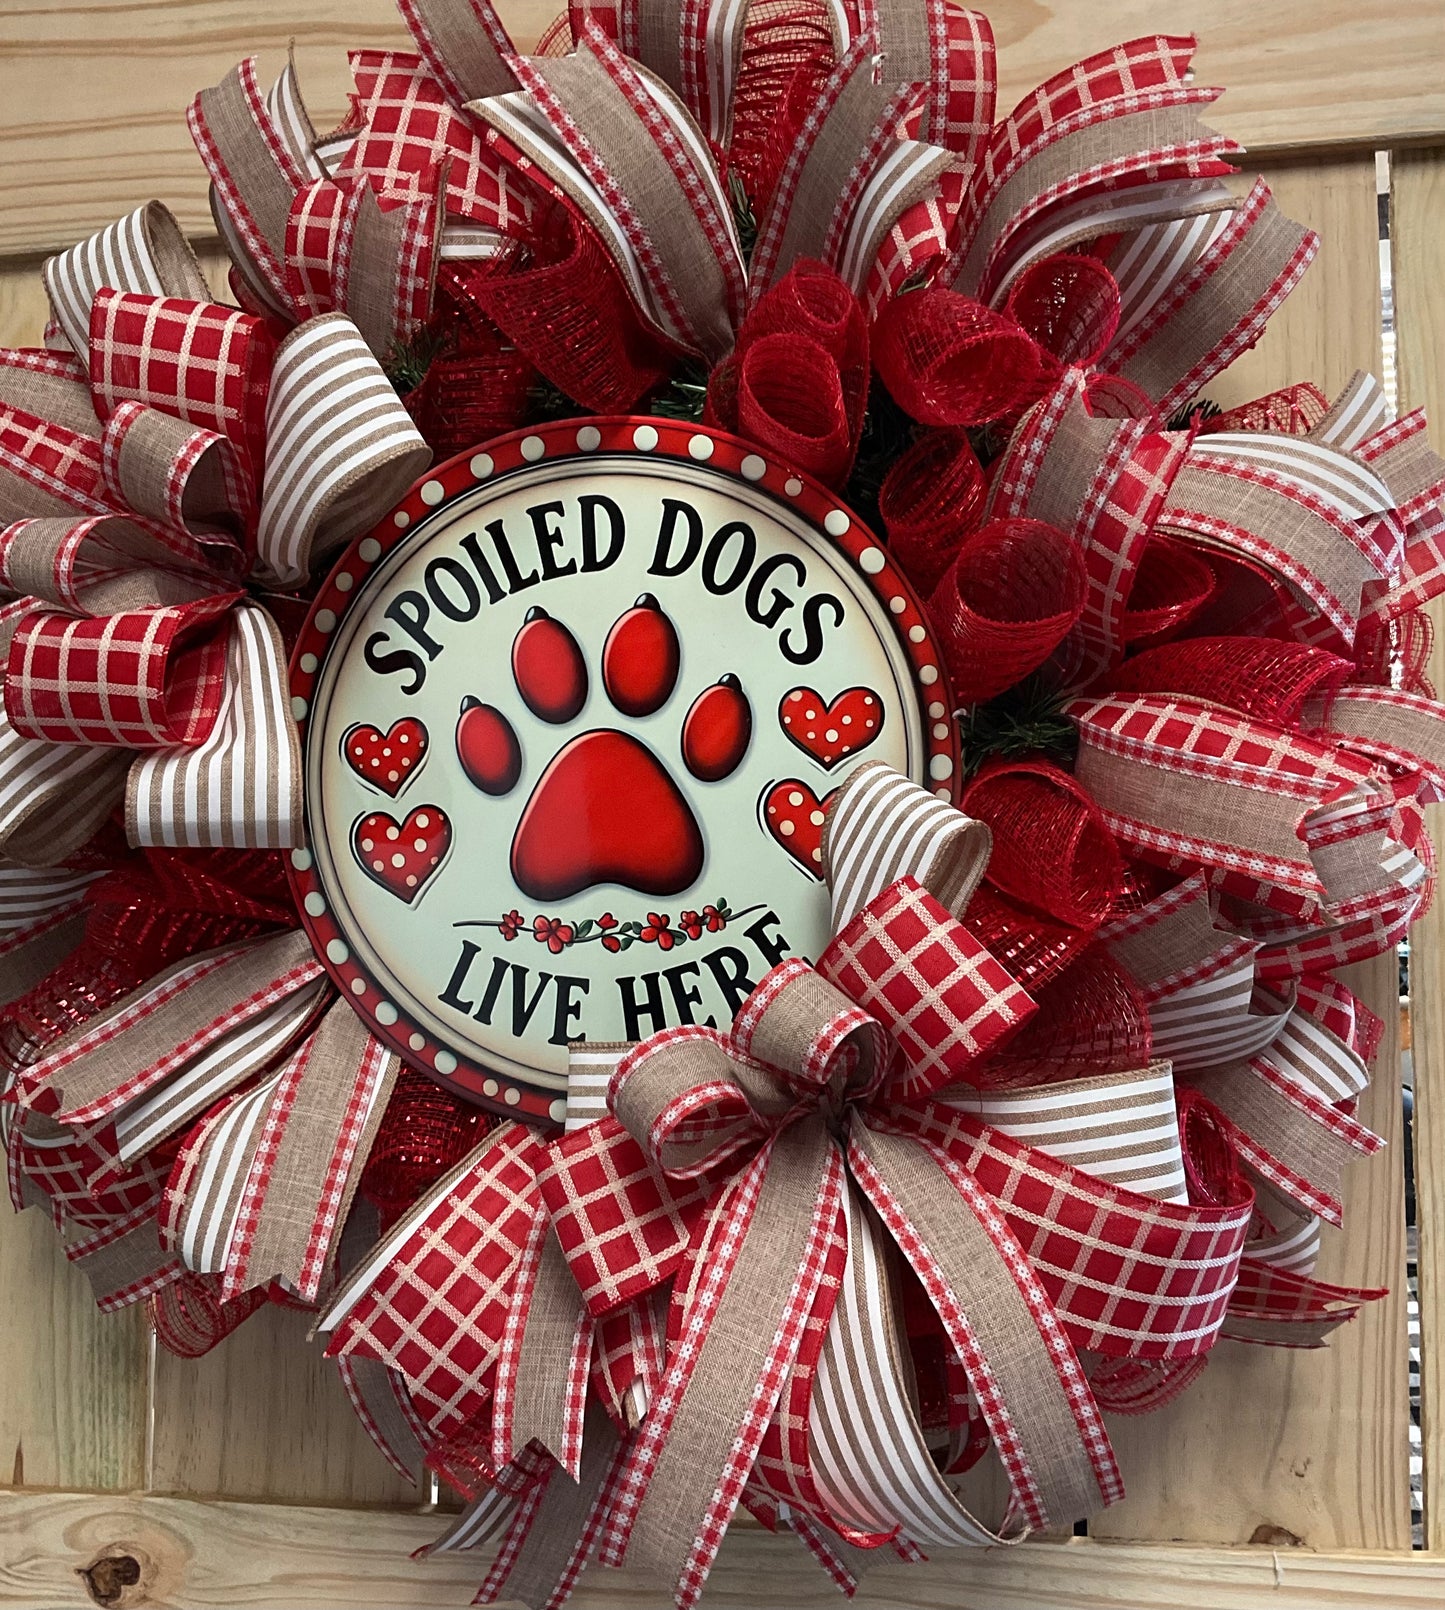 Spoiled dogs live here farmhouse wreath